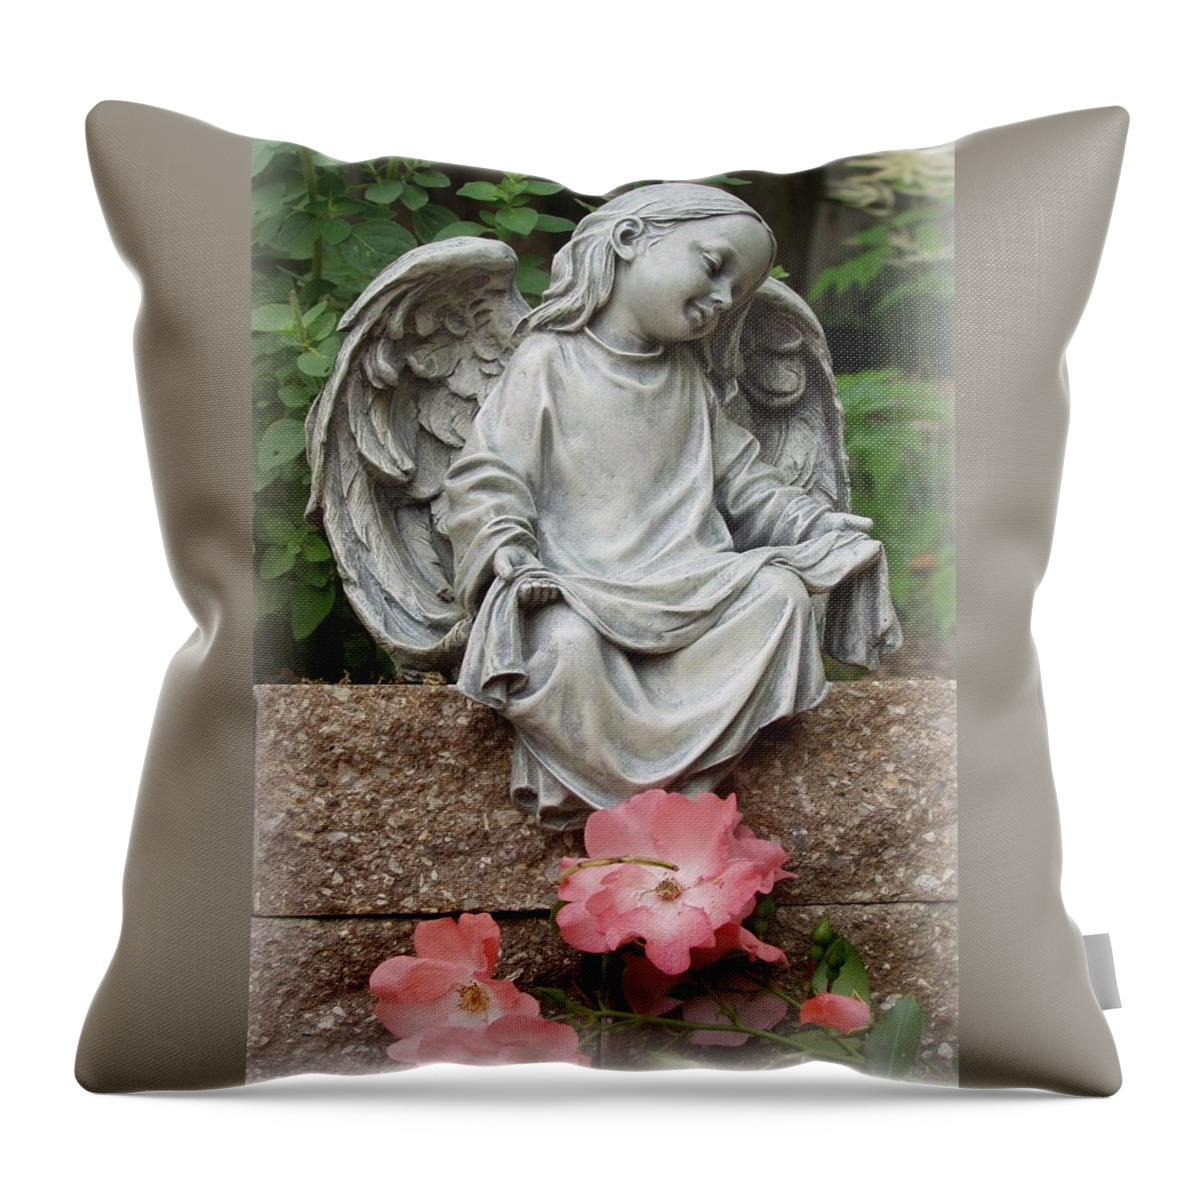 Yard Throw Pillow featuring the photograph For Hope by Carol Sweetwood